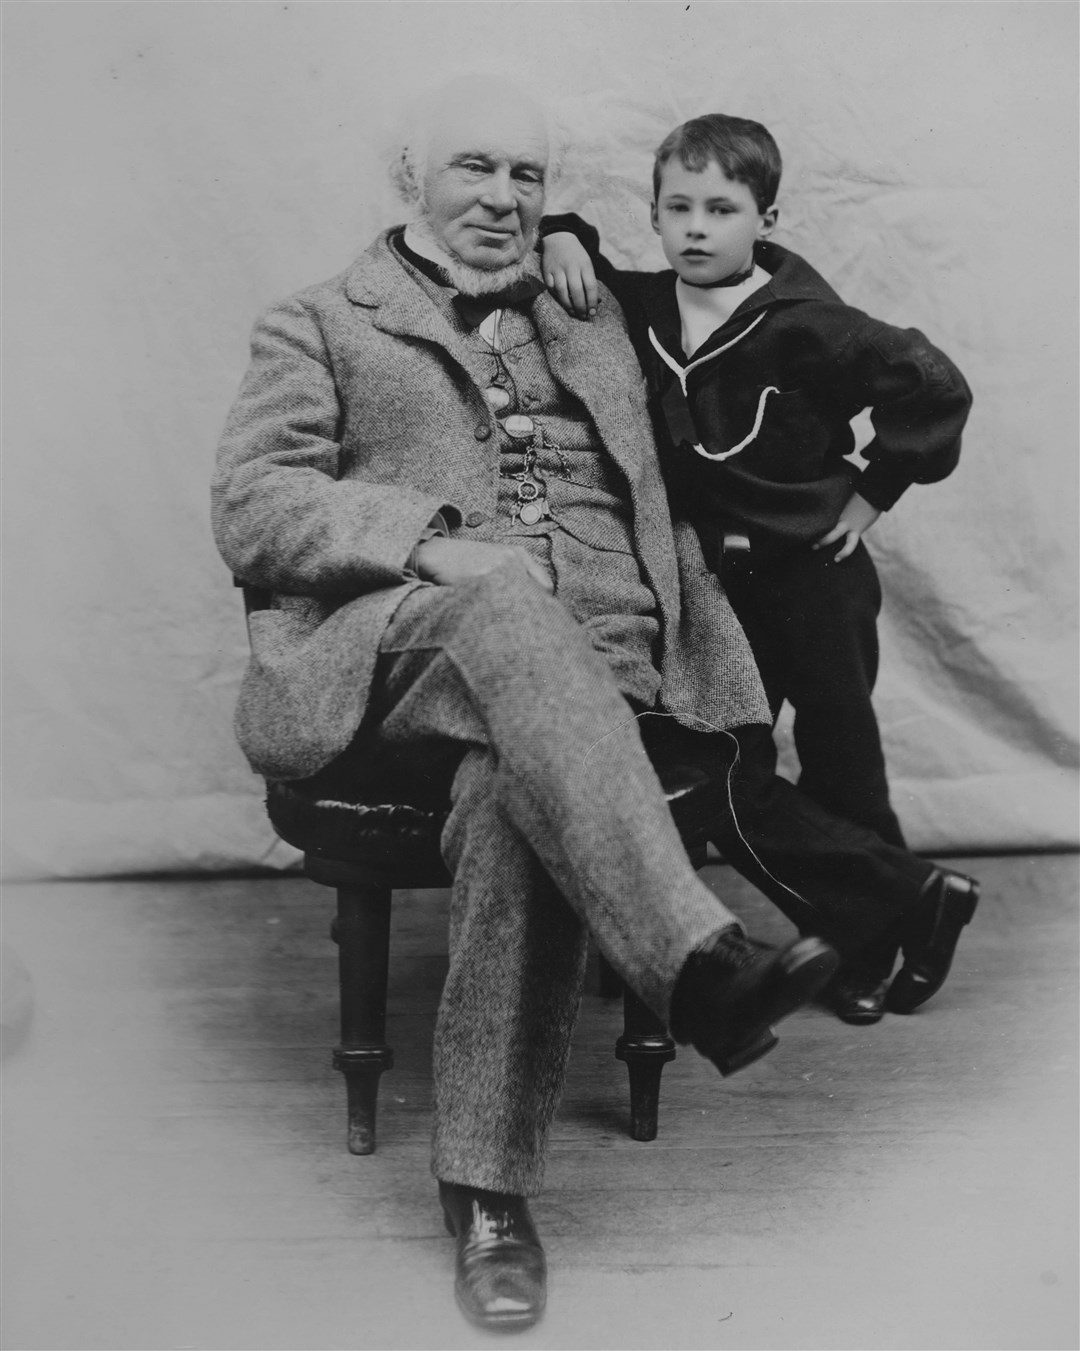 Sir John Fowler, railway engineer and co-designer of the Forth Road Bridge, seen here around 1895 with his grandson. Collection of Peter Newling, Ullapool.